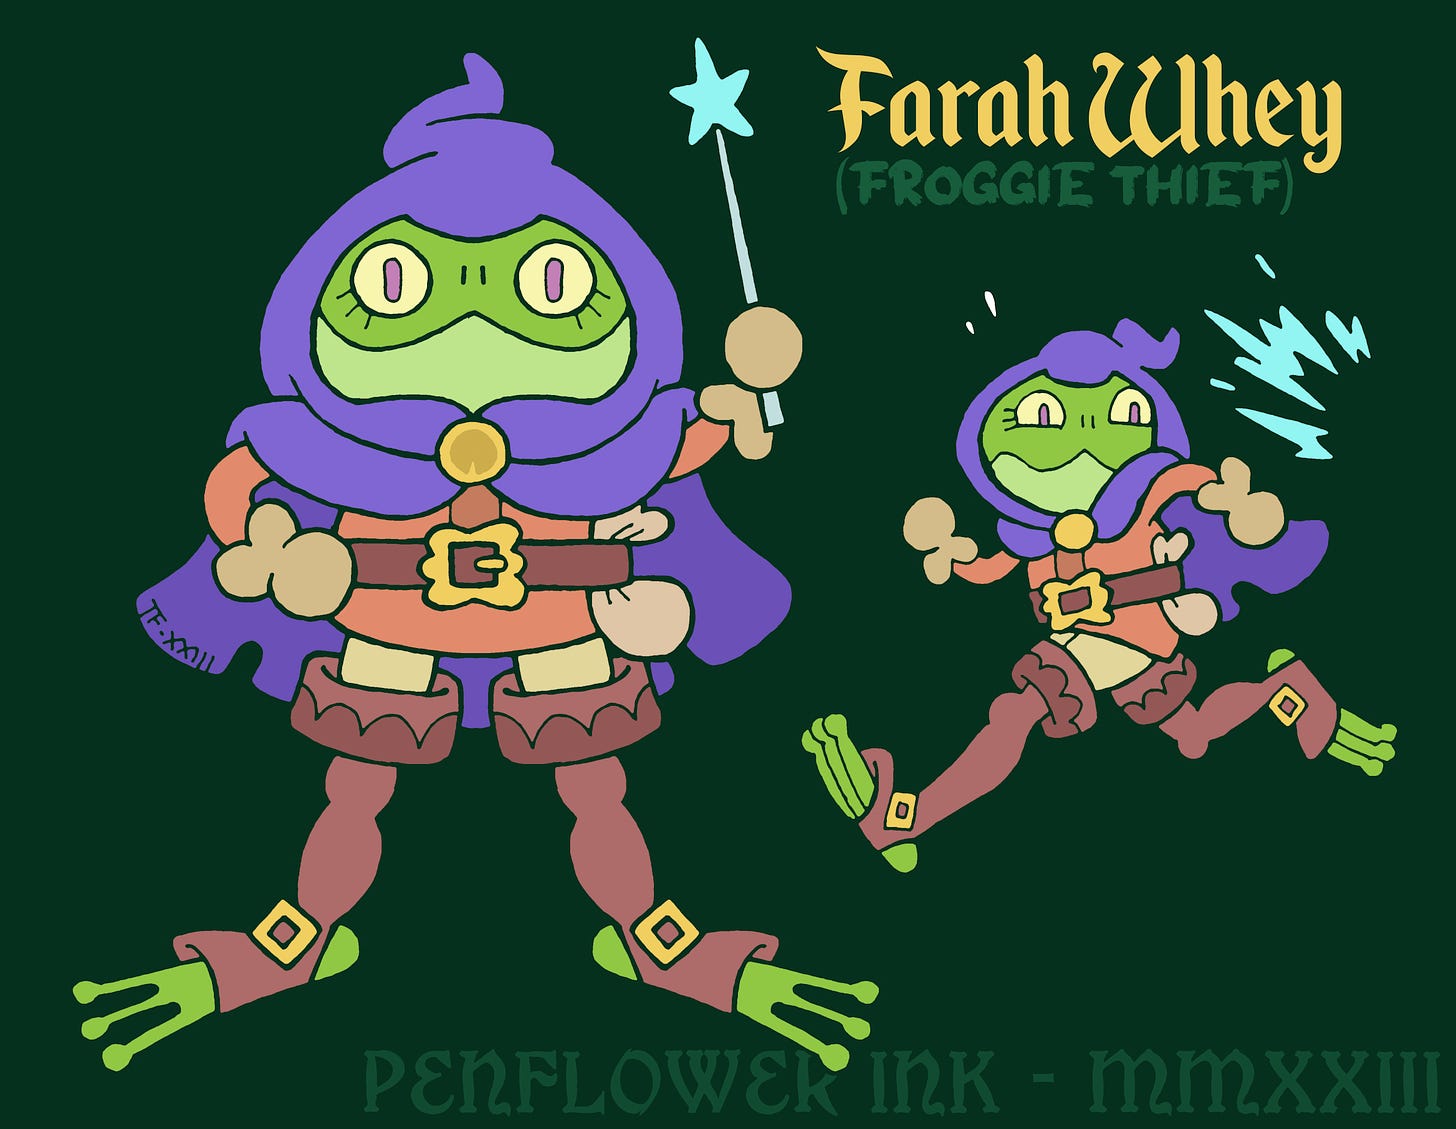 Traditionally hand drawn, digitally coloured illustration of a green frog wearing a purple hood and cloak, orange tunic, brown belt and brown thigh-high boots. She is proudly holding up a silver magic wand, then running away from some kind of magical mishap she has caused. Text reads: Farah Whey, froggie thief.